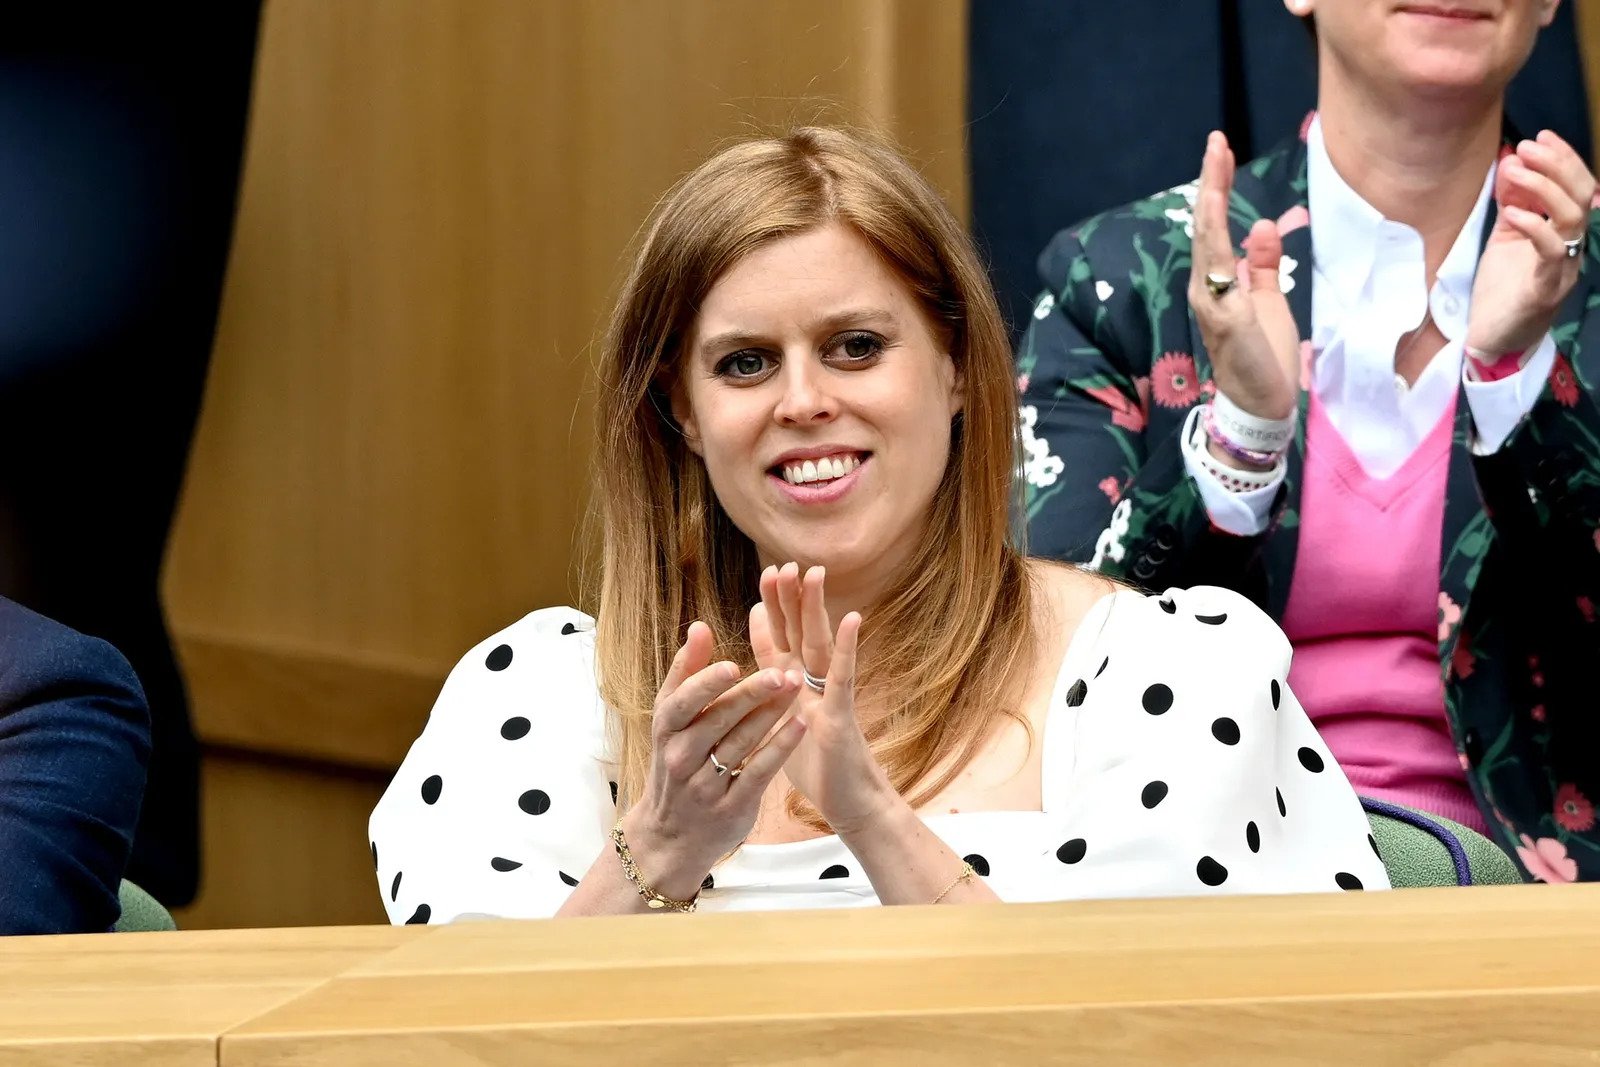 33 Facts about Princess Beatrice - Facts.net